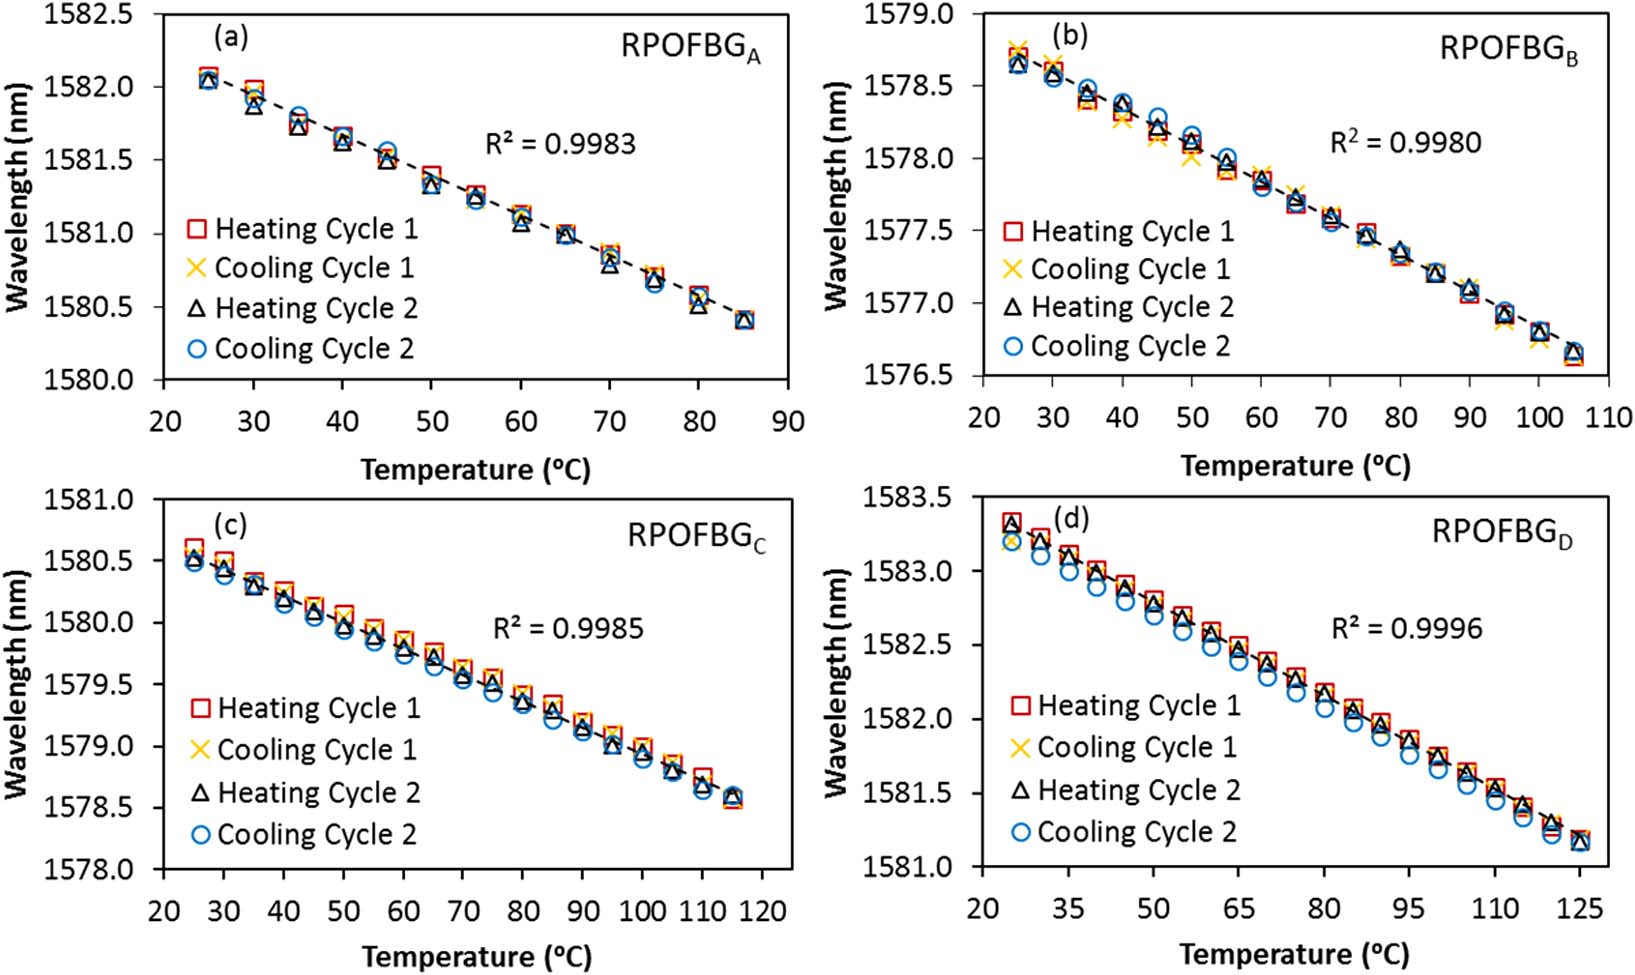 Temperature measurements for two heating and cooling cycles each: (a) RPOFBGA from 25°C to 85°C, (b) RPOFBGB from 25°C to 105°C, (c) RPOFBGC from 25°C to 115°C, and (d) RPOFBGD from 25°C to 125°C.